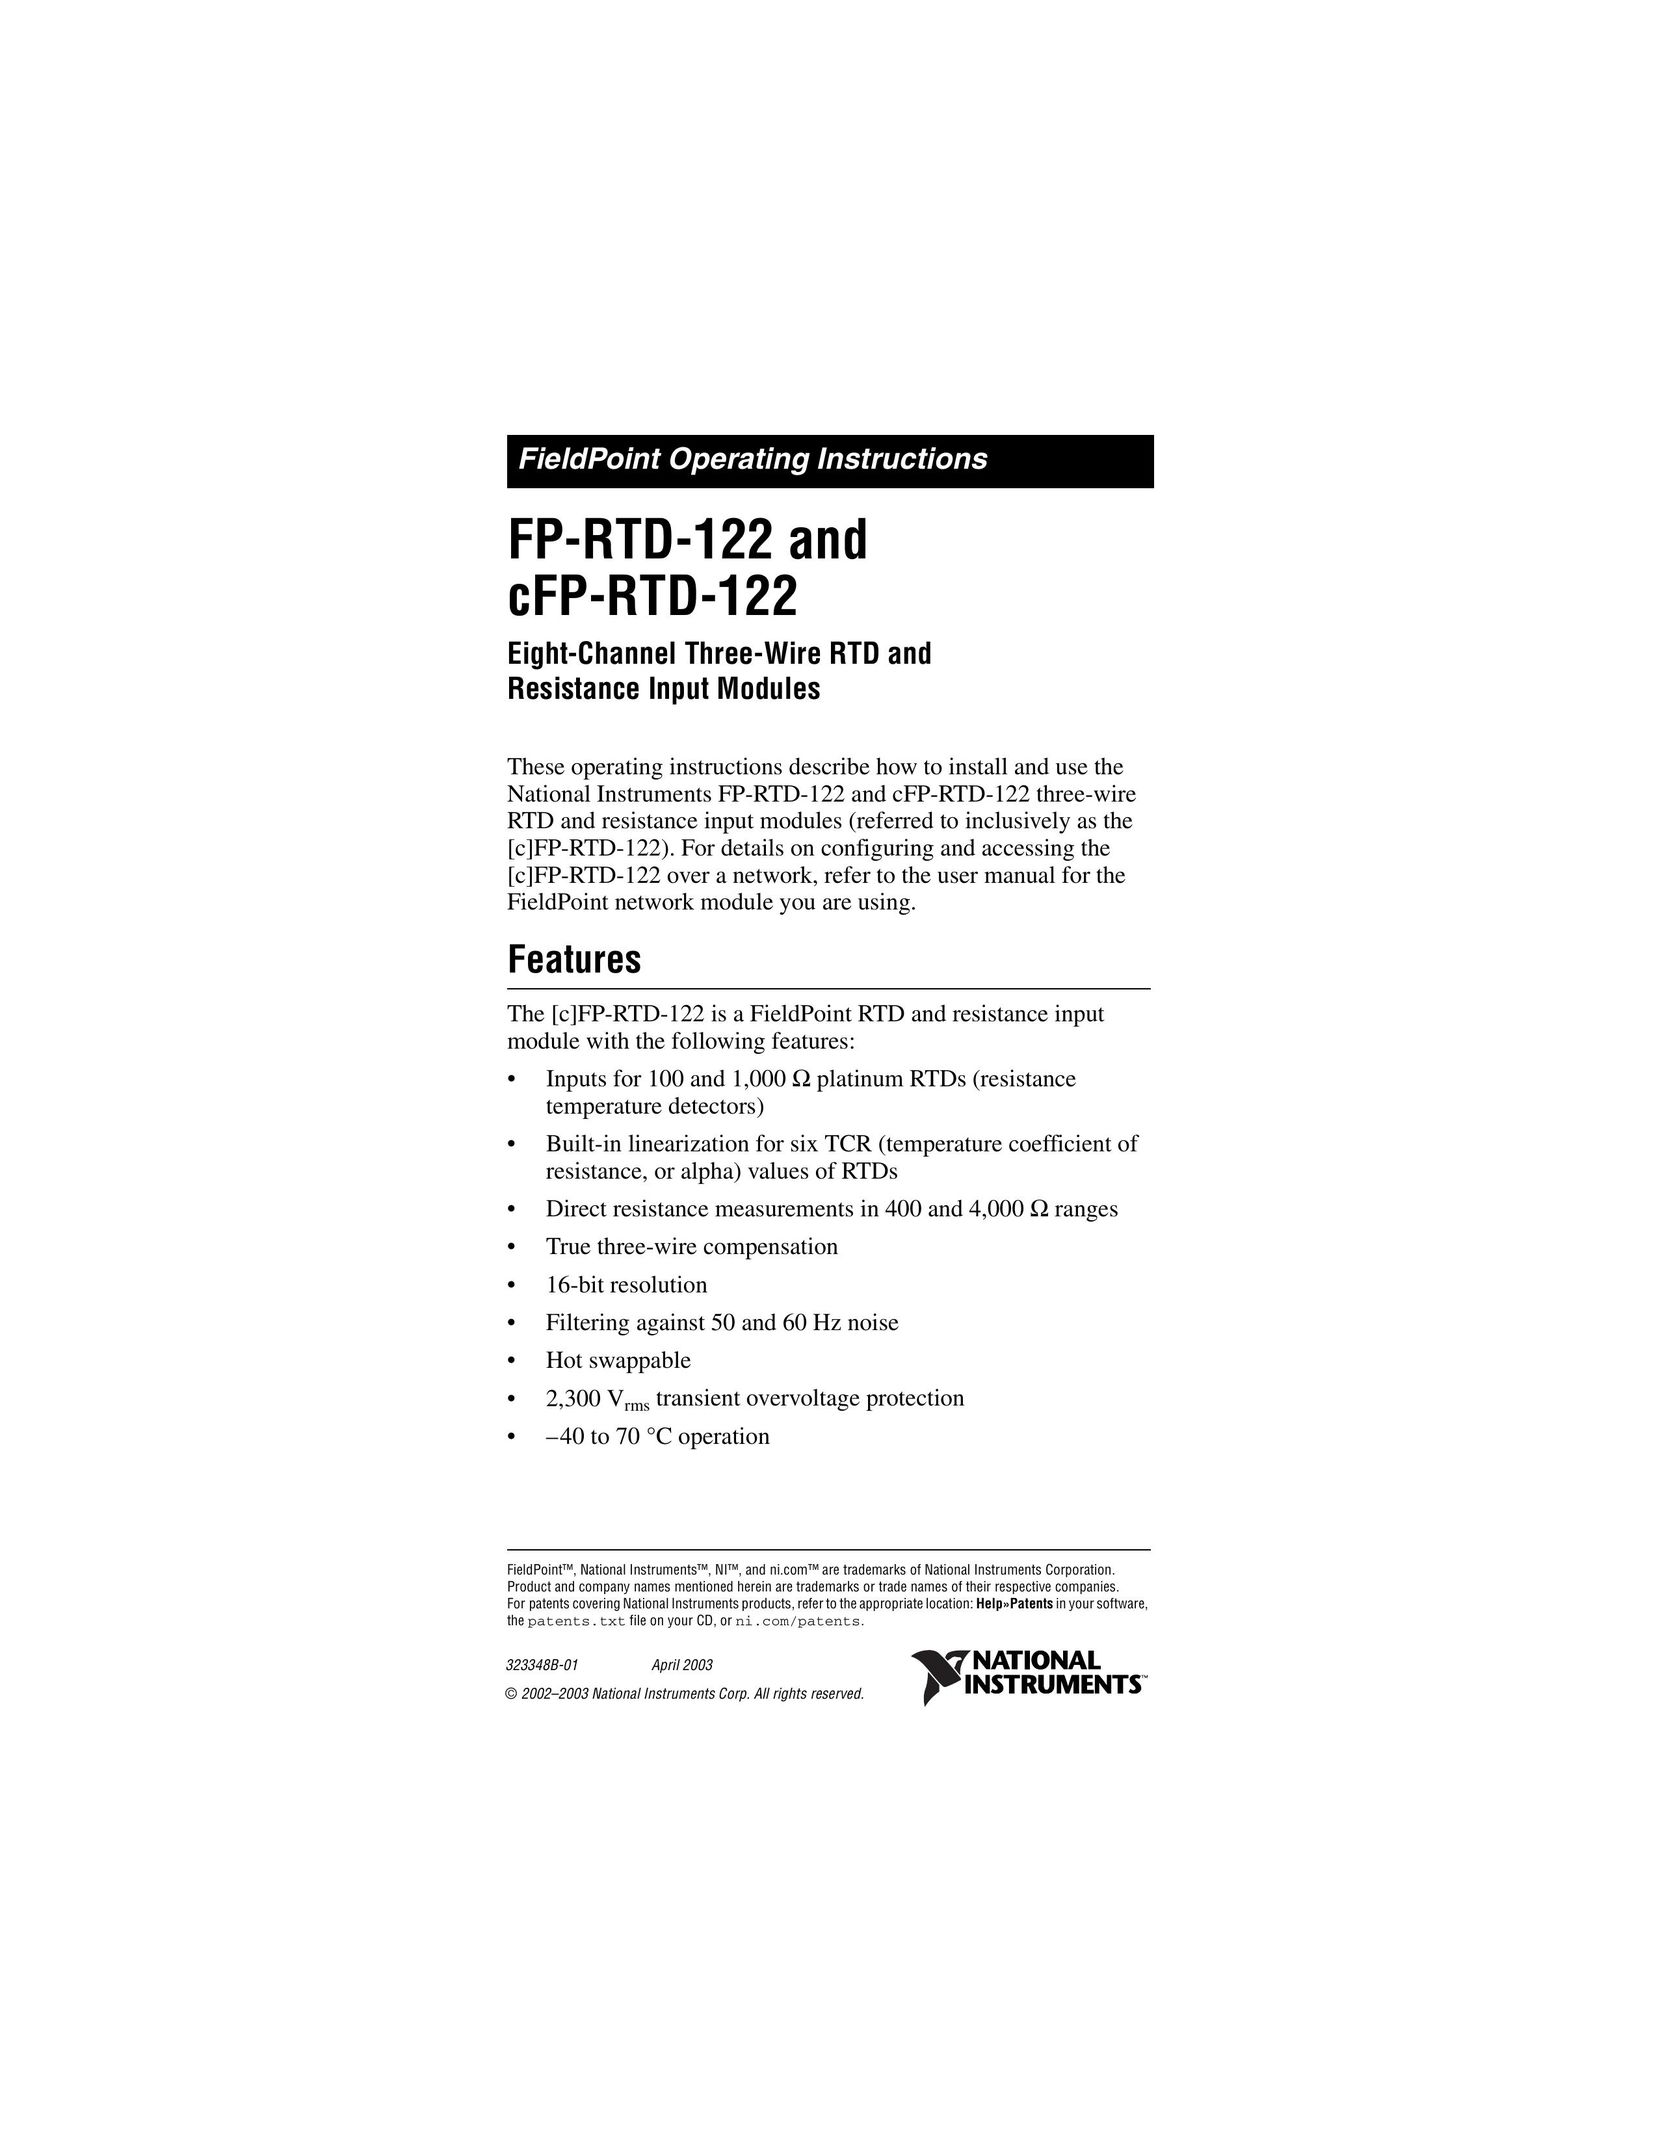 National Instruments cFP-RTD-122 Network Router User Manual